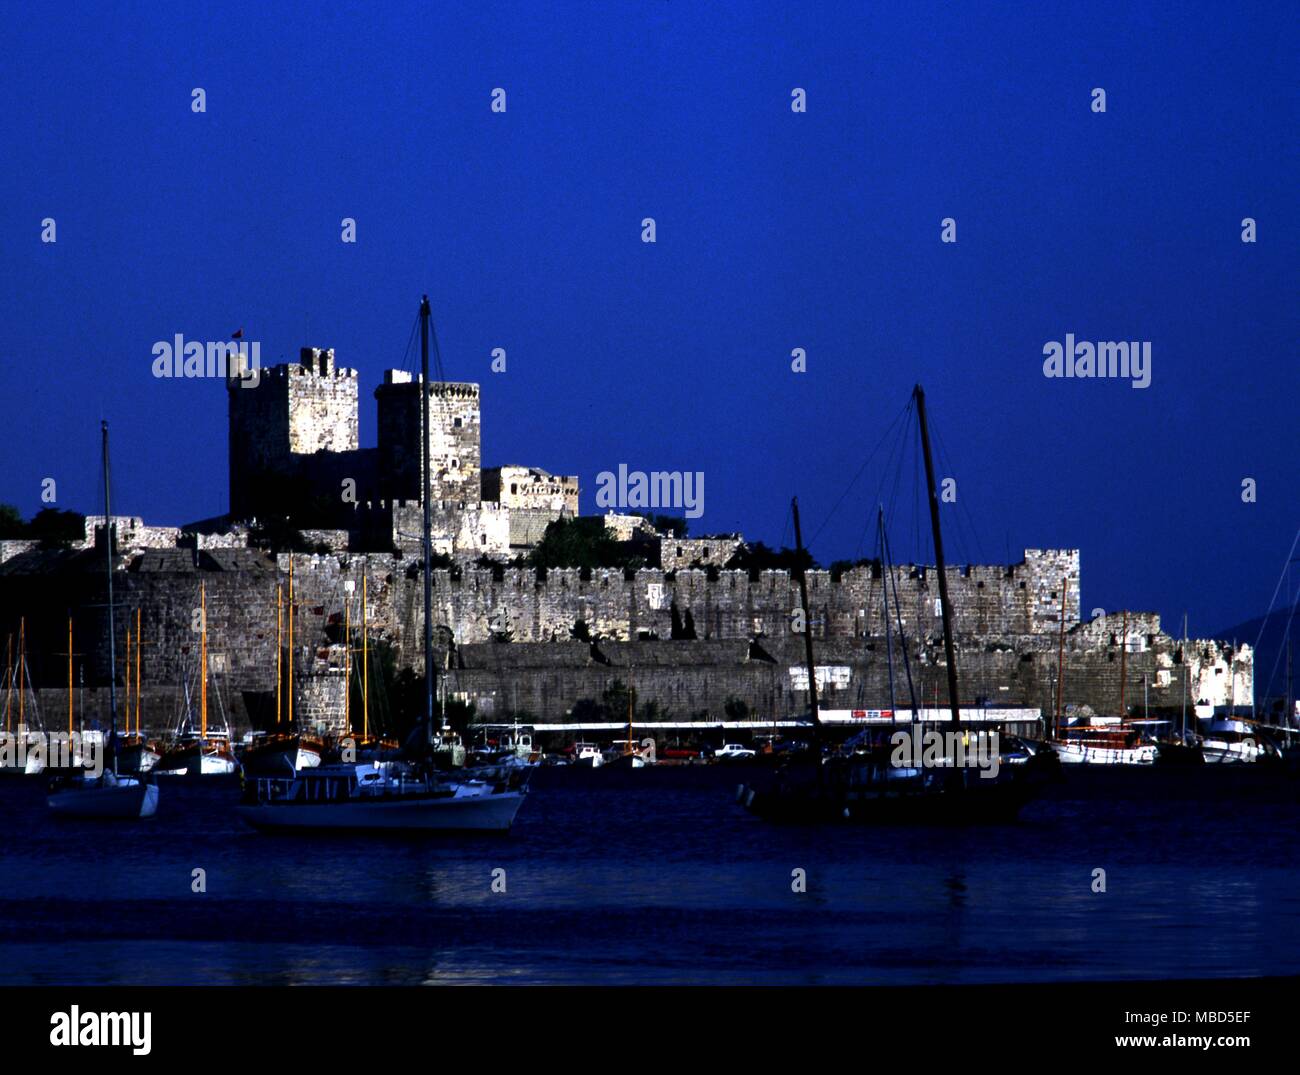 Turkey. Bodrum. The Knight's Castle across the harbour. Stock Photo